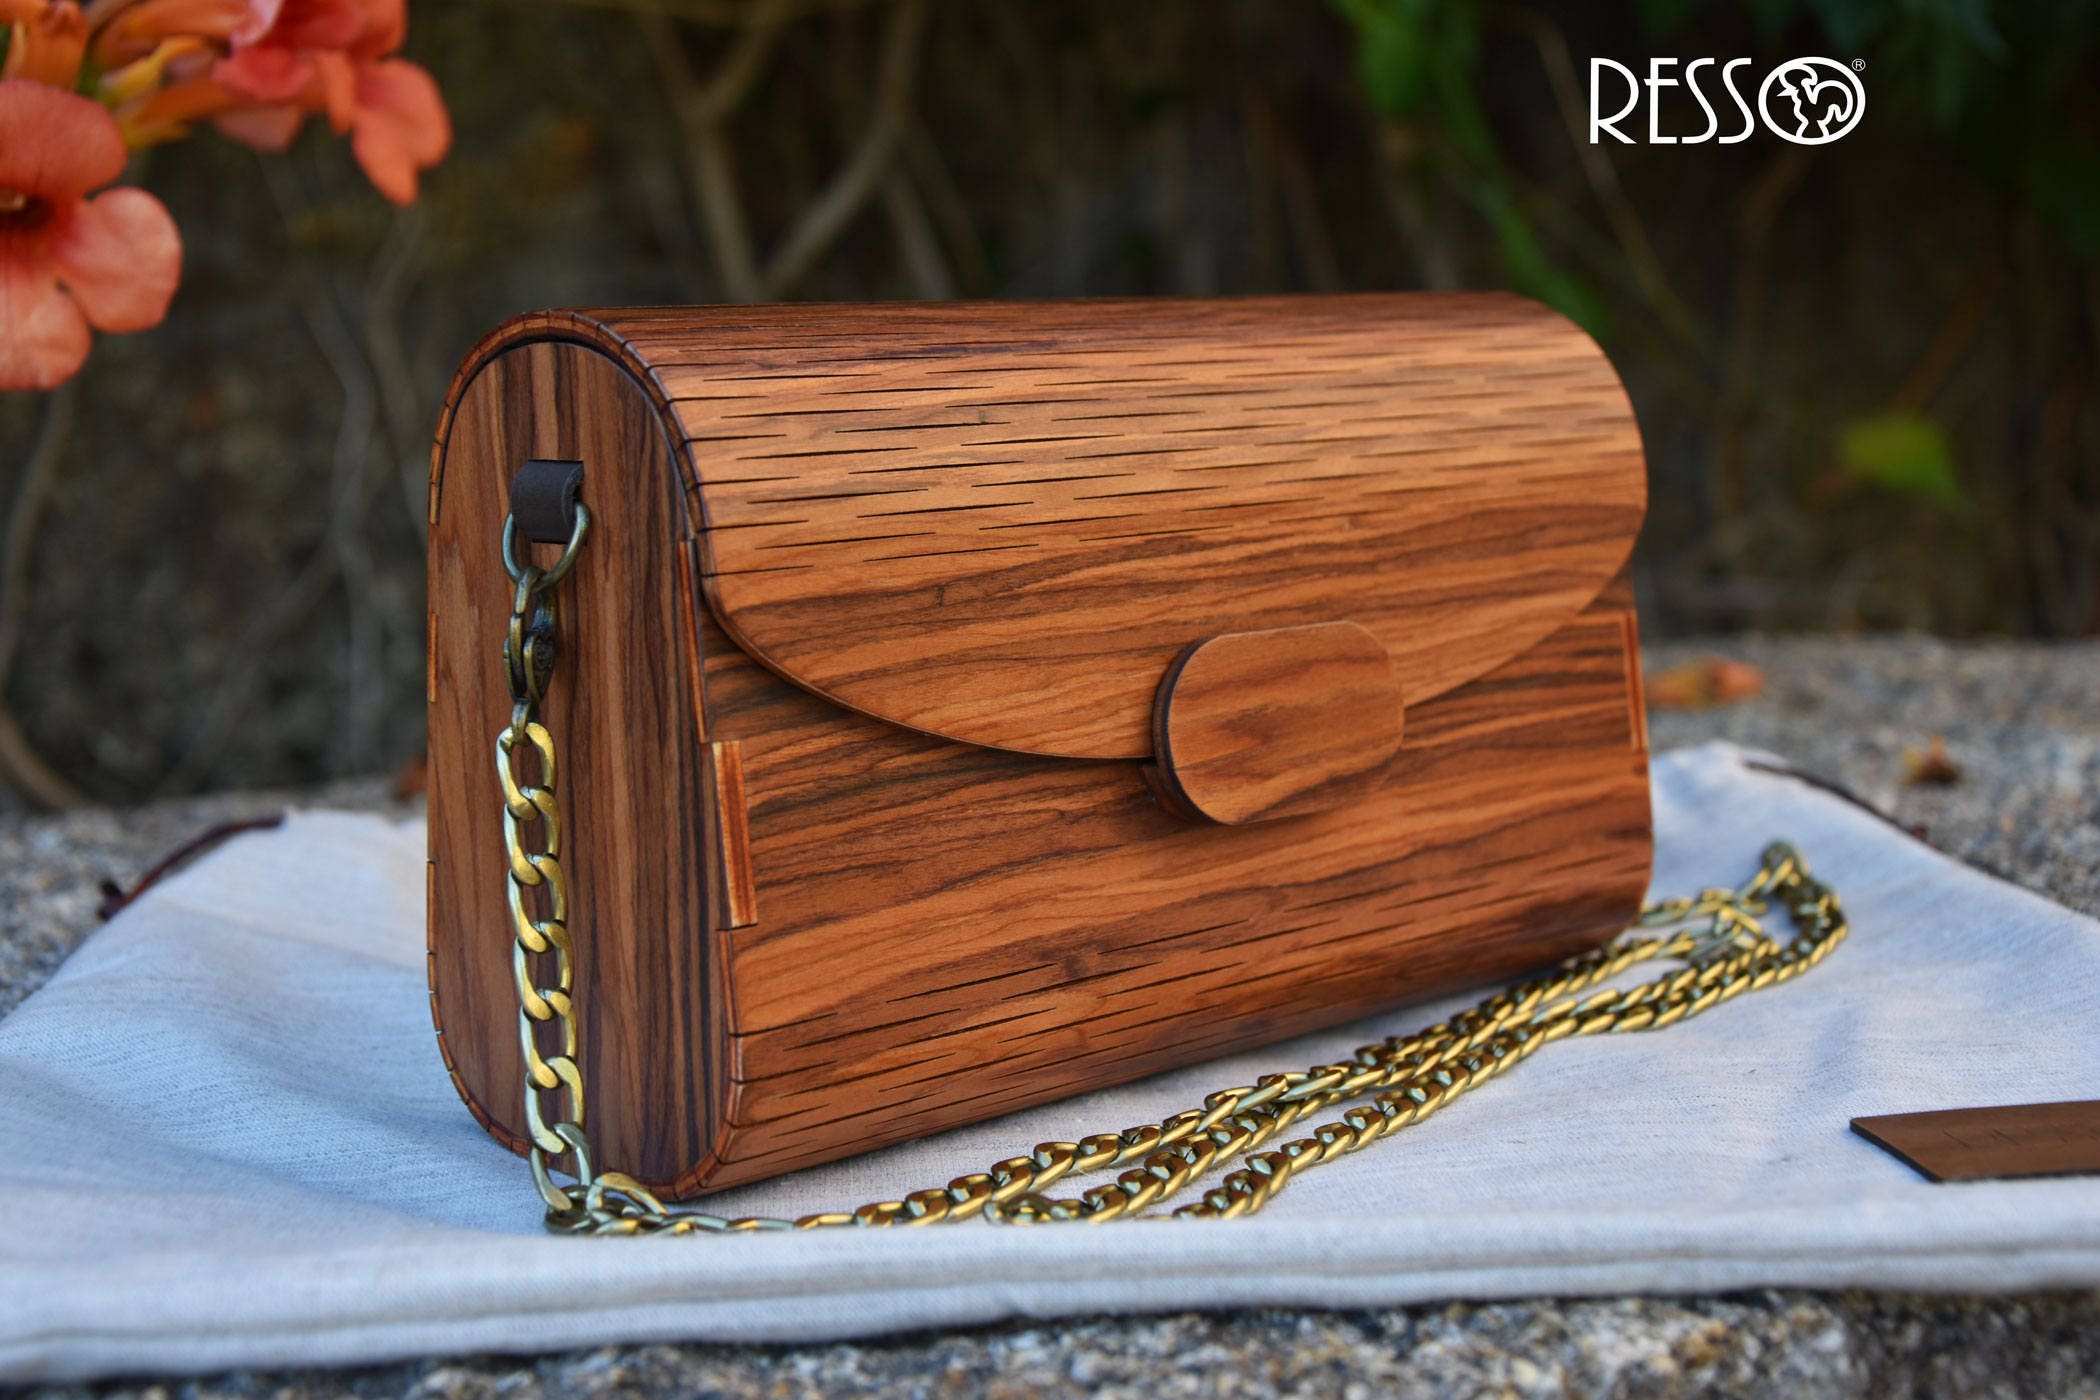 BiWood Handmade Wooden Bags - A chic handmade wooden bag to complete your  look?# Yes,please🌹 BiWood SS20 THE ART OF HANDMADE ! ! ! | Facebook